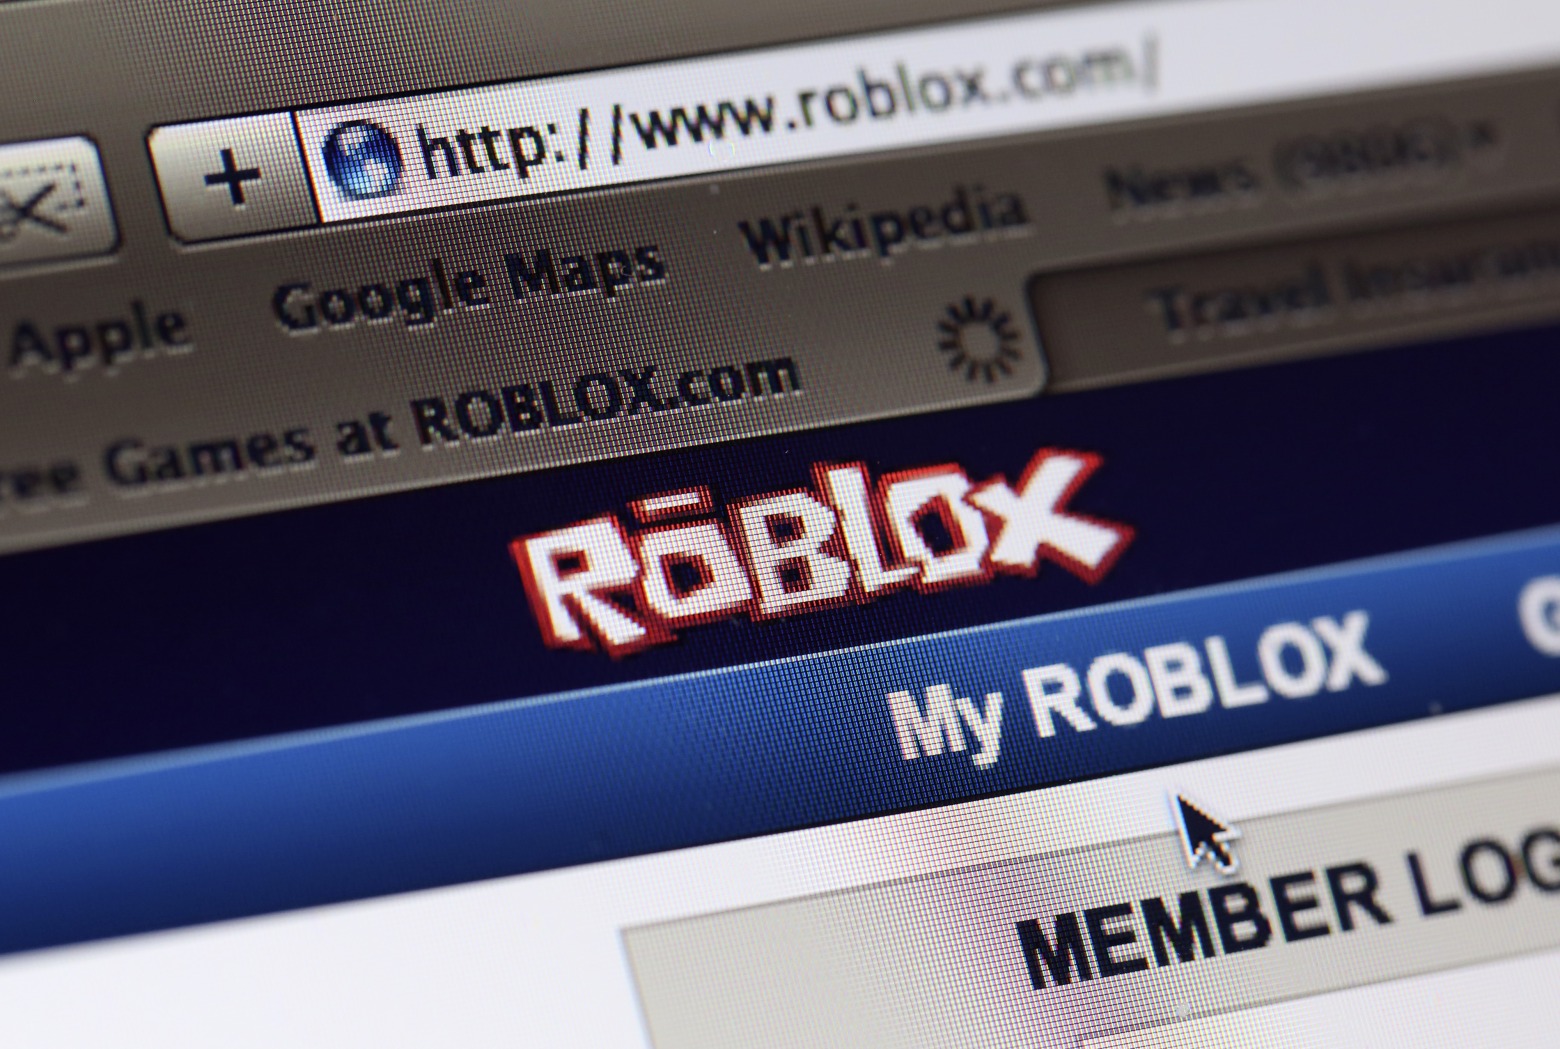 Roblox Files for IPO as Pandemic Drives Video Game Growth - Bloomberg